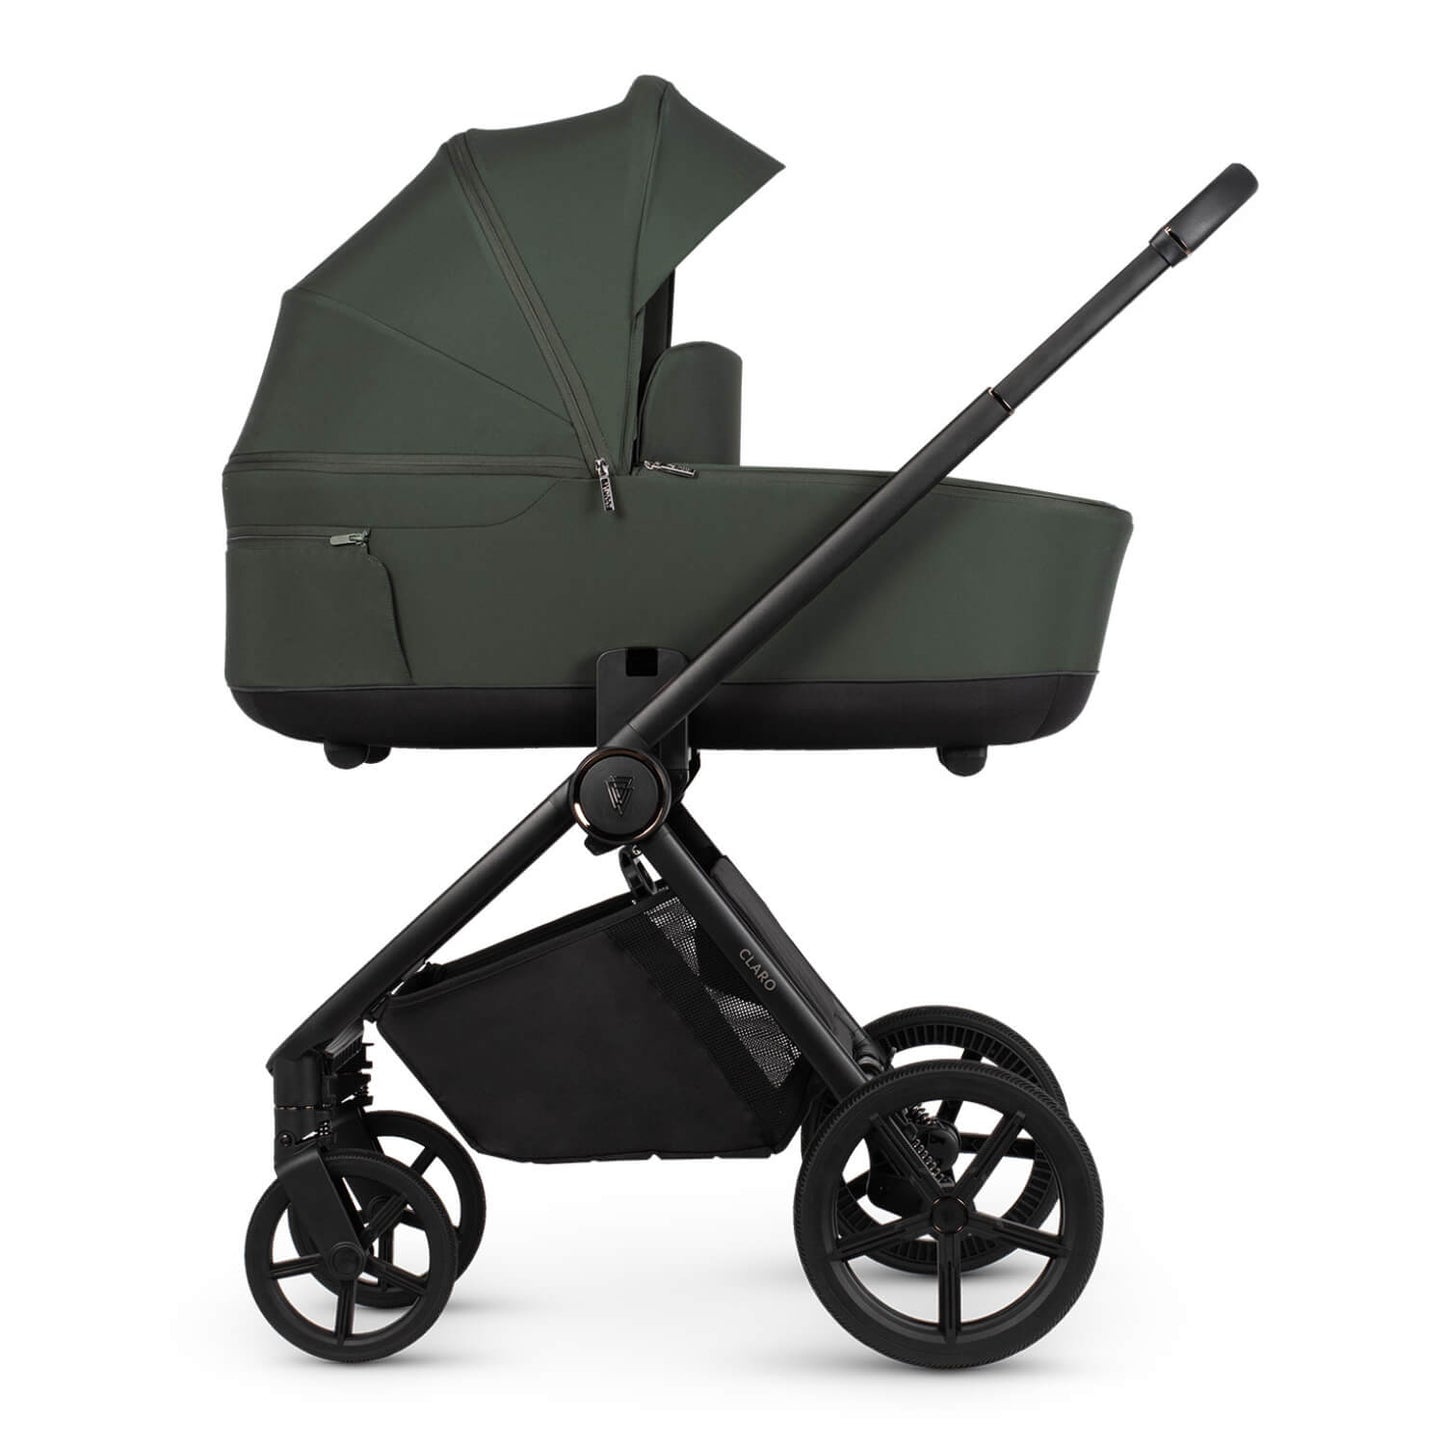 Venicci Claro carrycot in Forest colour placed in the Claro frame